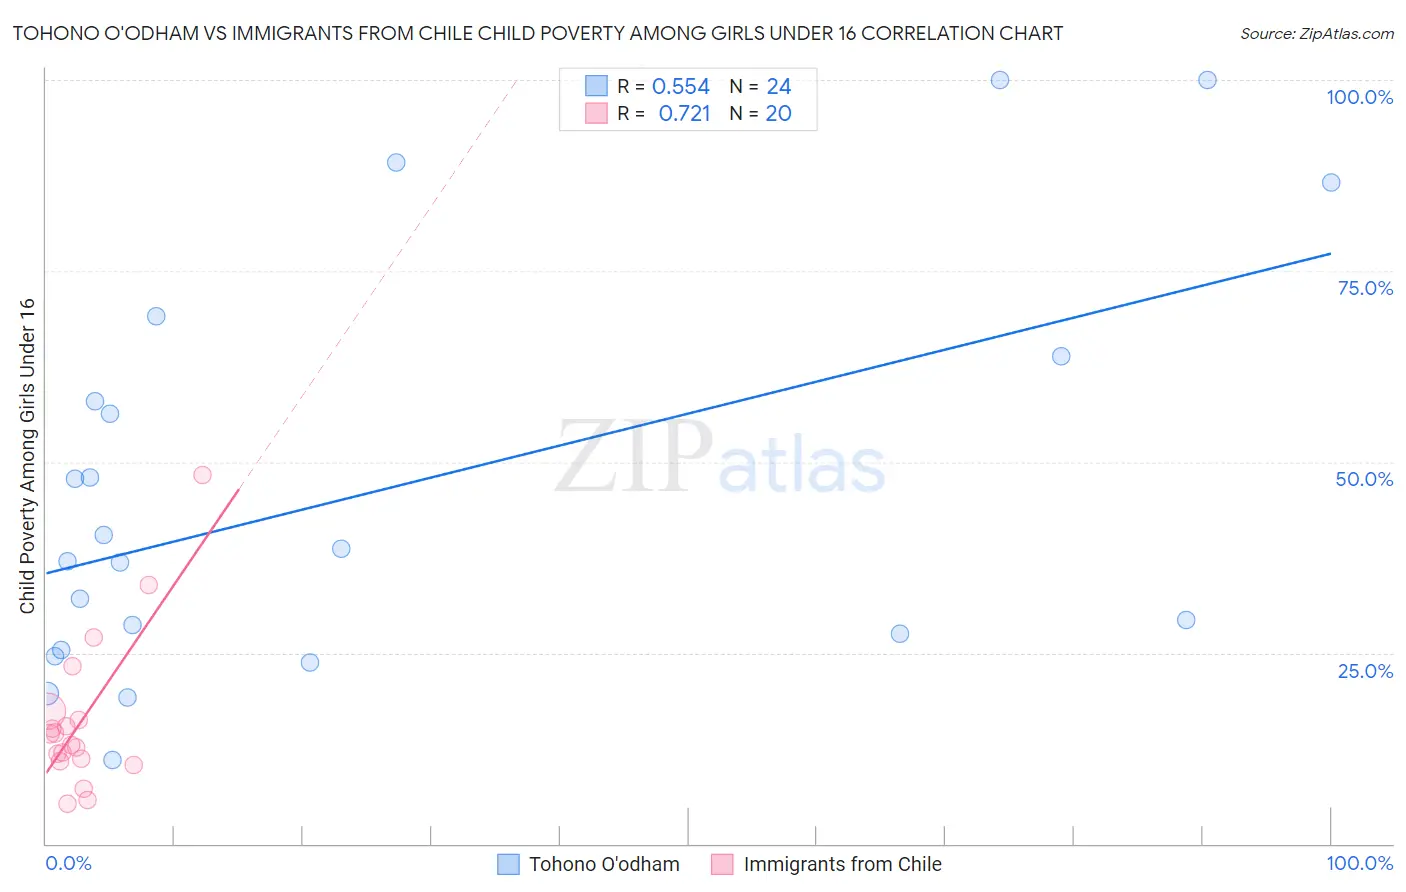 Tohono O'odham vs Immigrants from Chile Child Poverty Among Girls Under 16